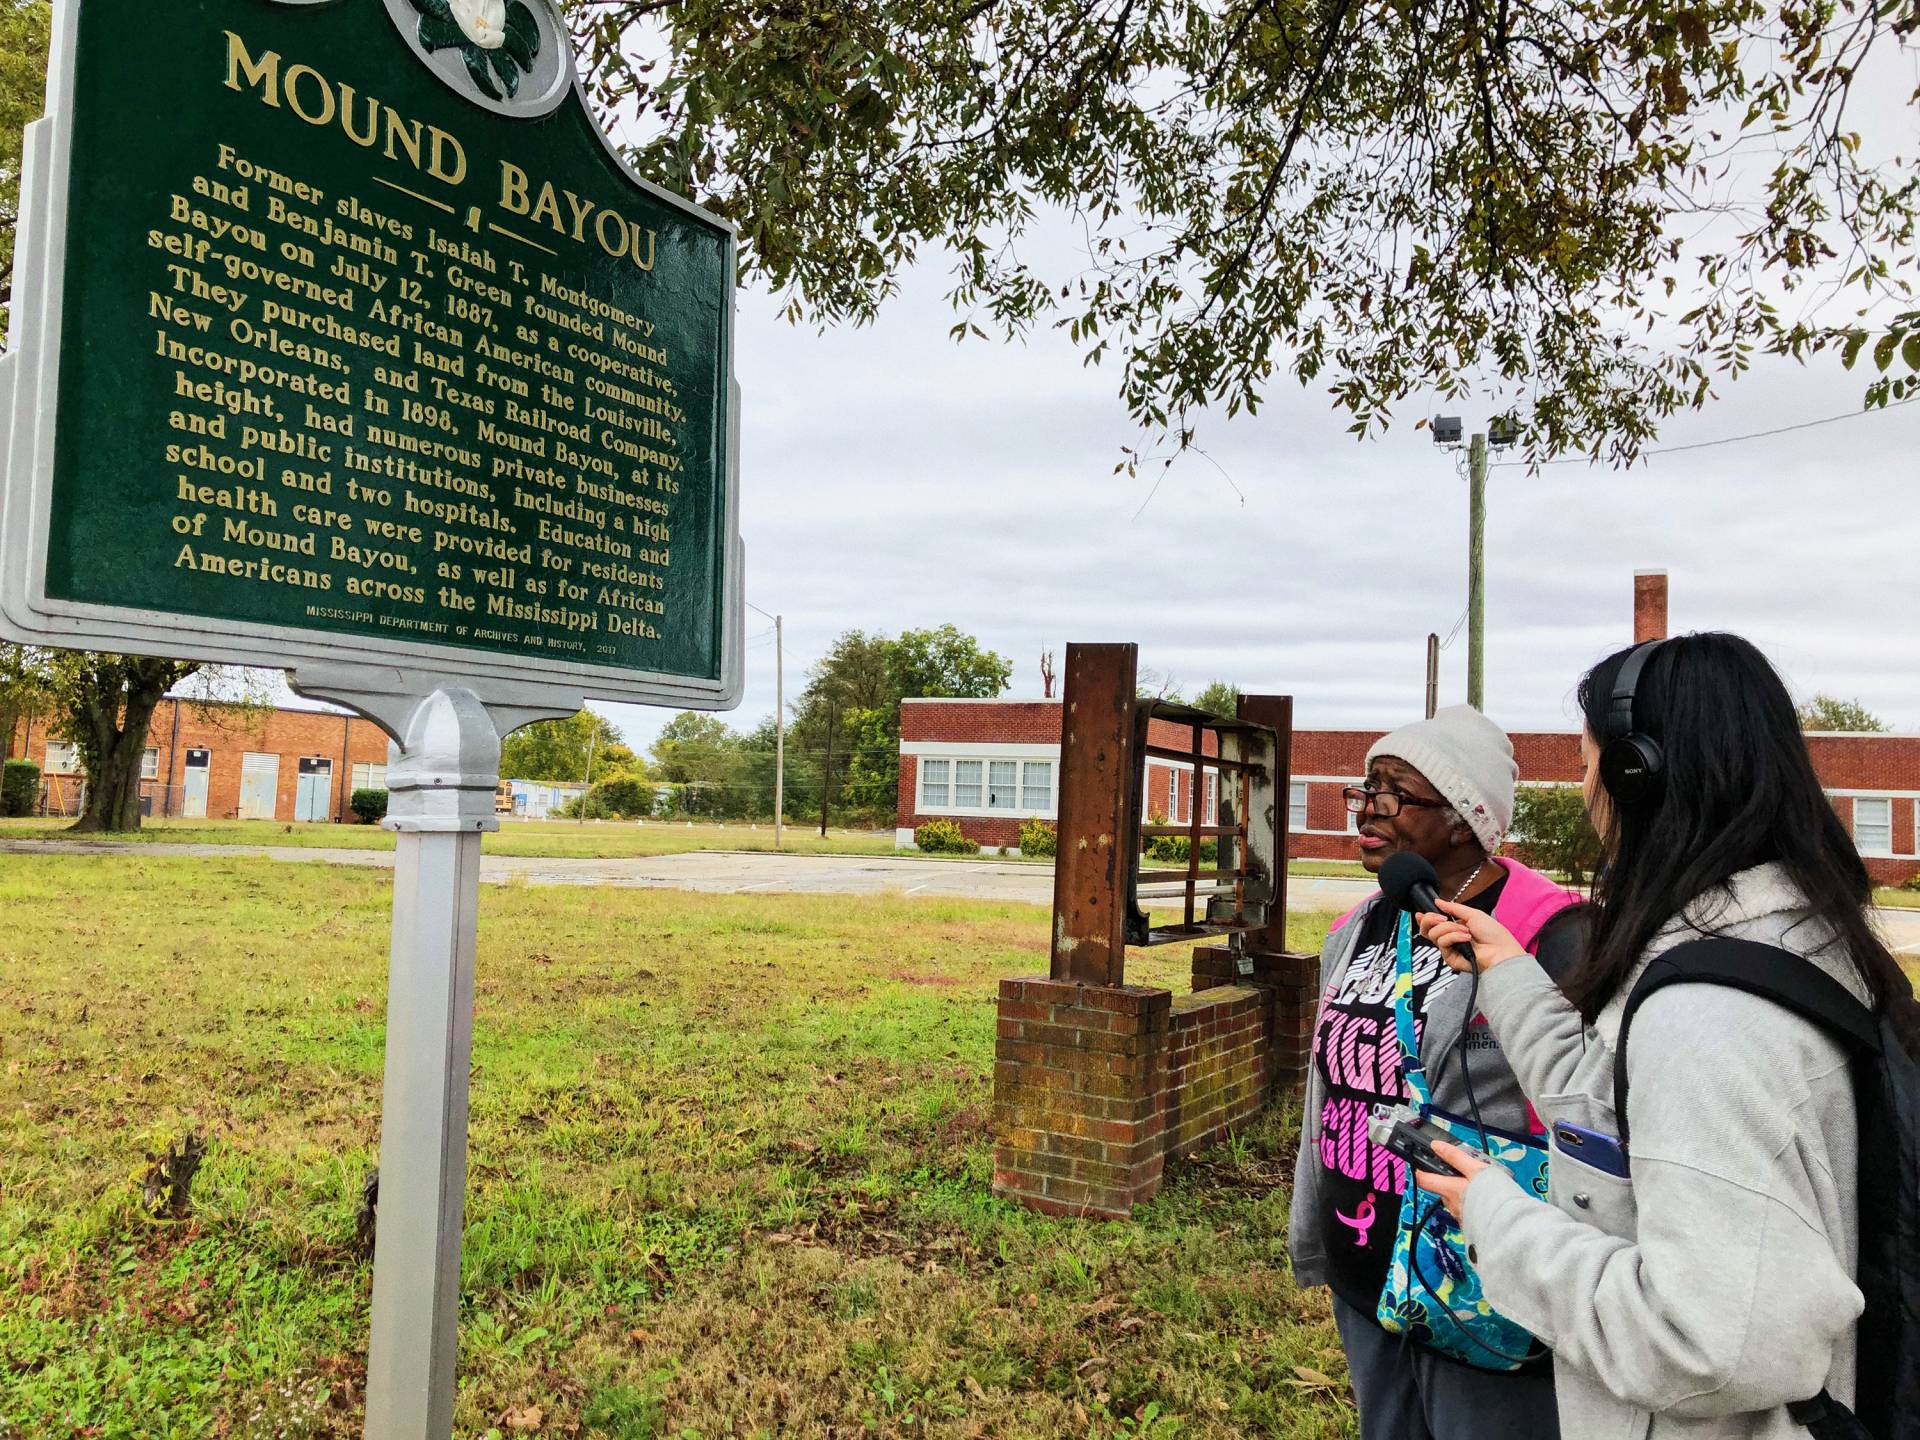 A student interviews the mayor of Mound Bayou next to a historical plaque